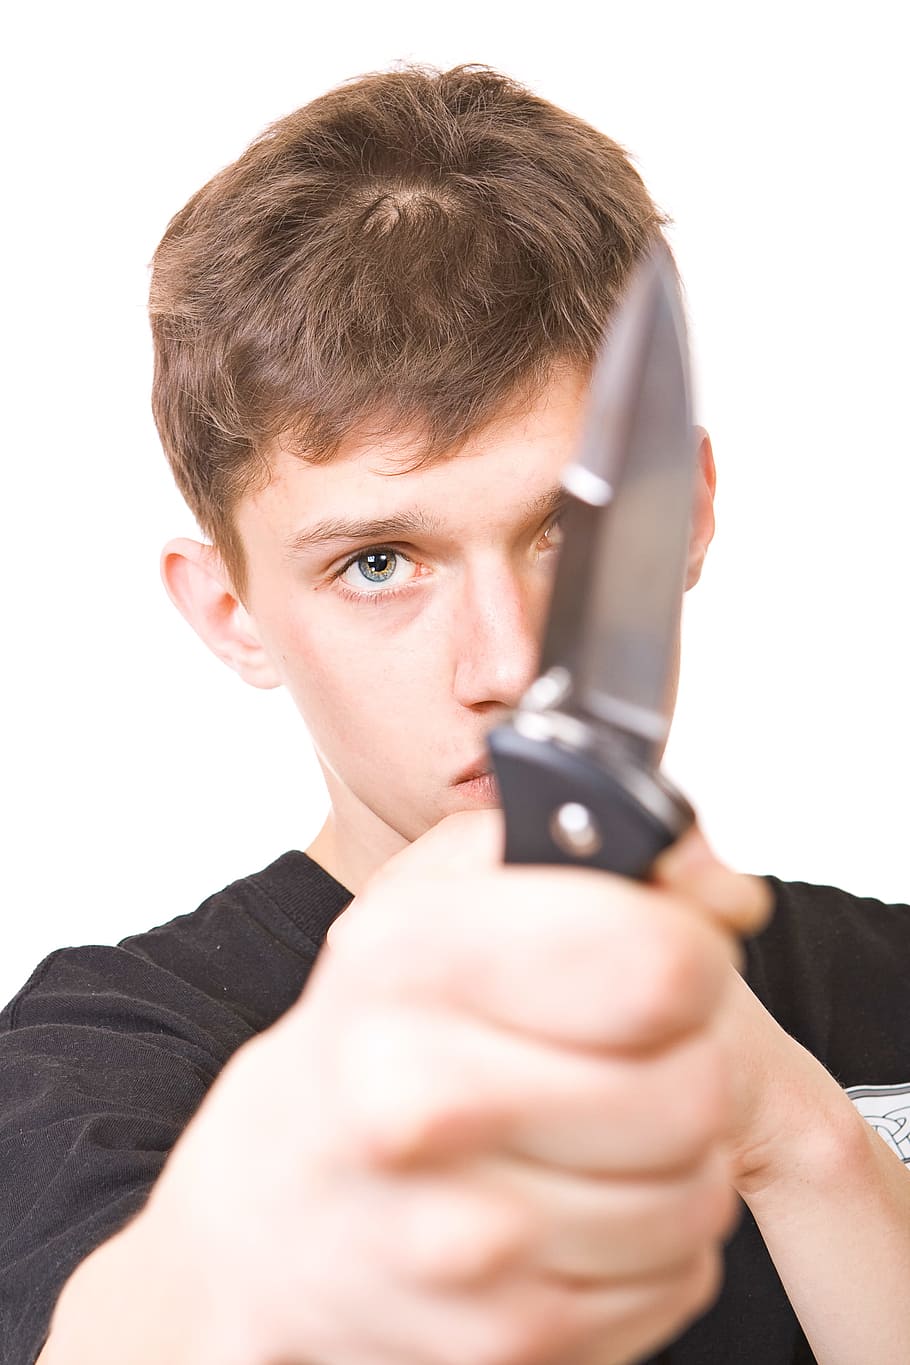 man, white, knife, background, isolated, young, adult, face, male, looking